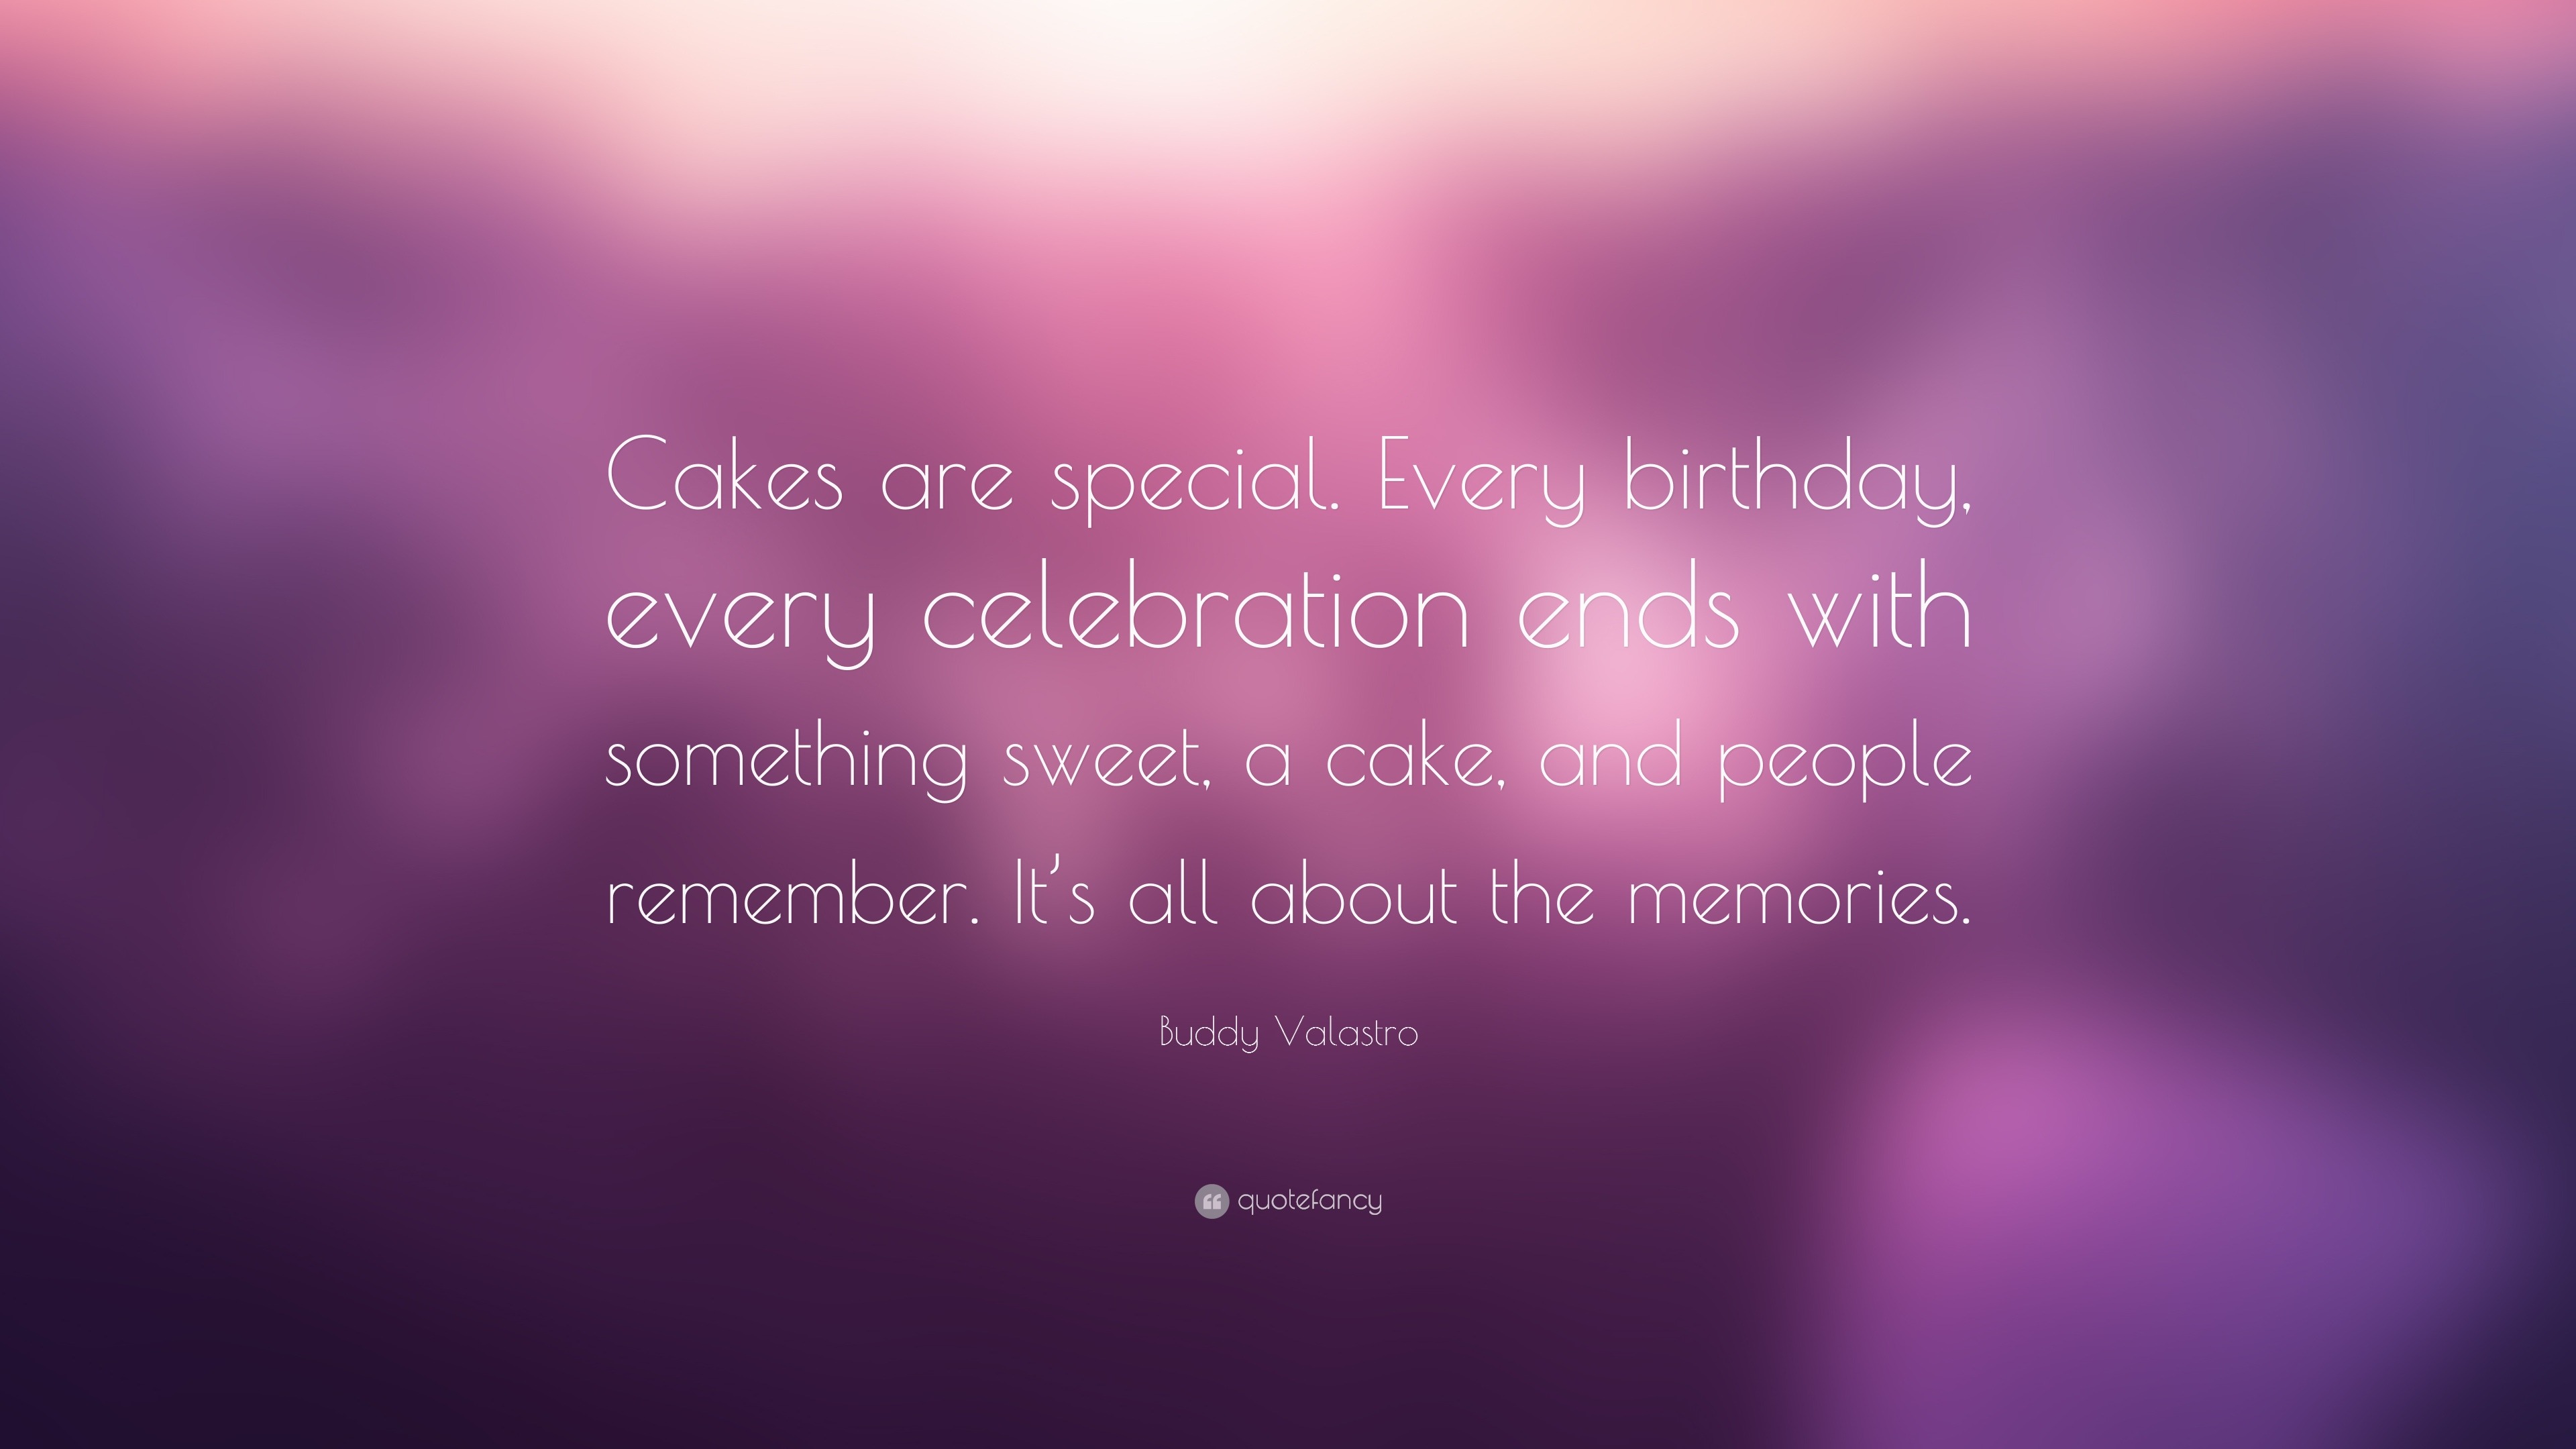 Greeting Card With Quote About Cakes. 